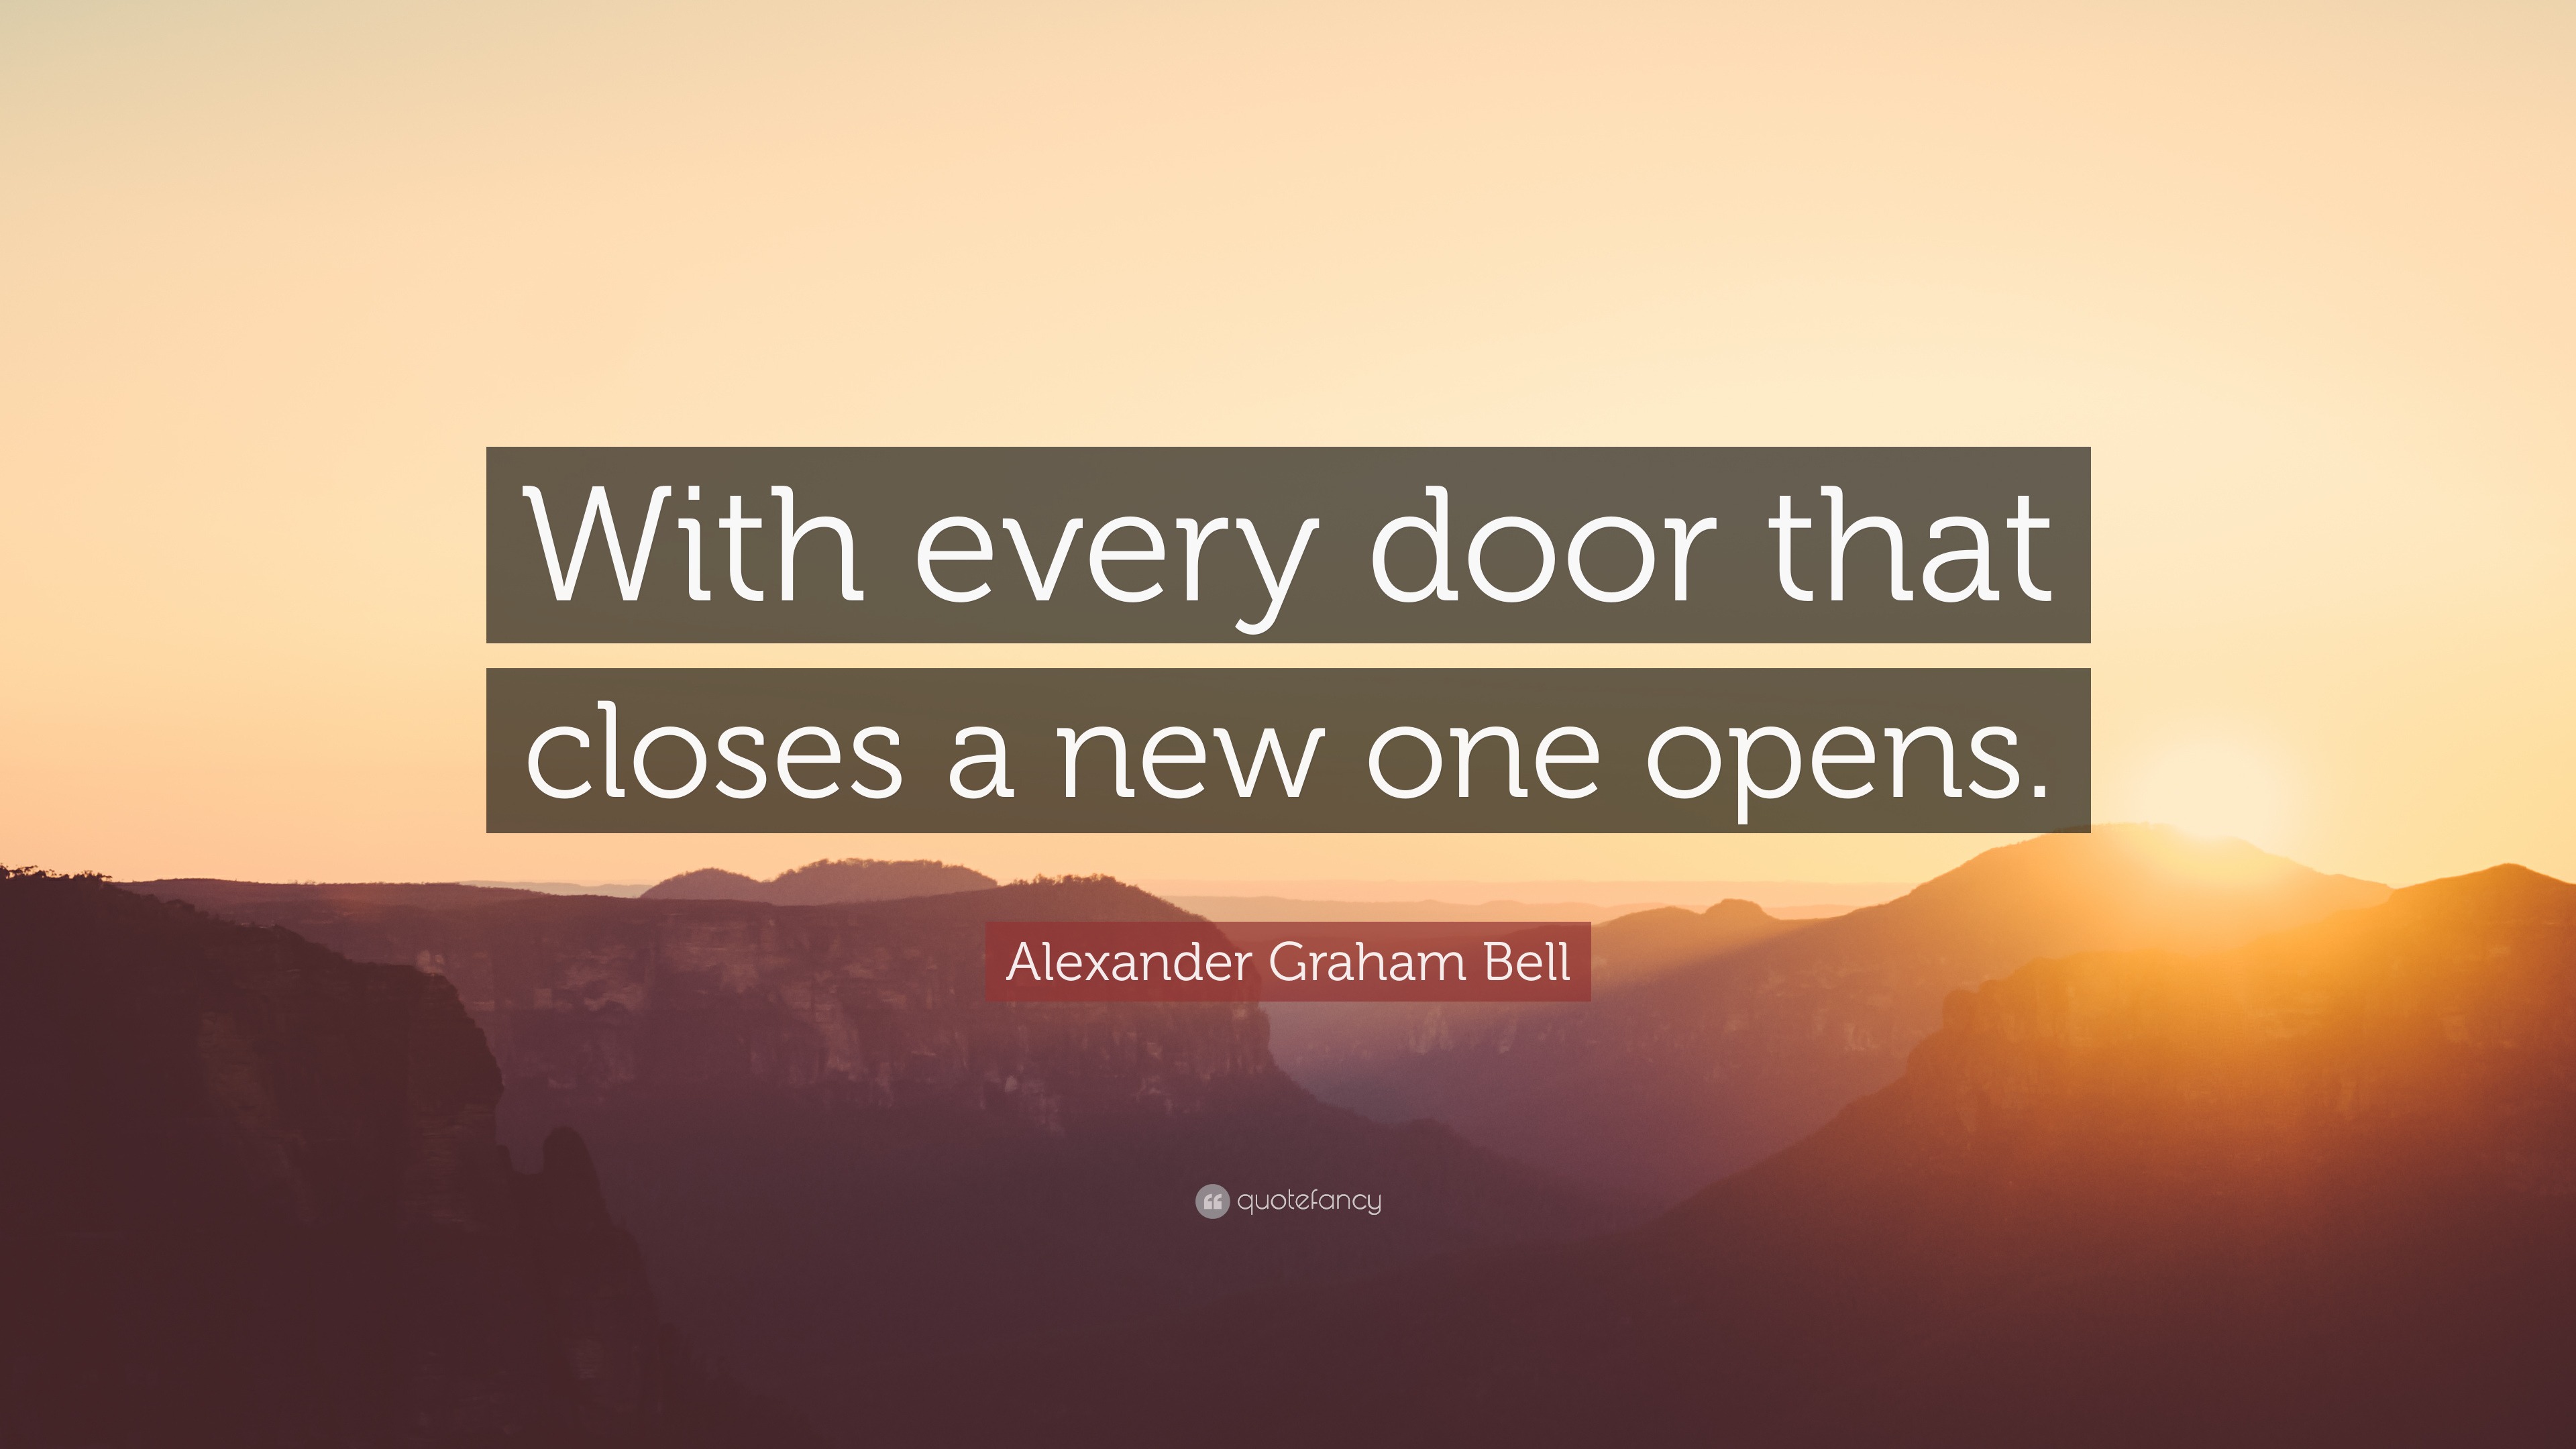 Alexander Graham Bell Quote: “With every door that closes a new one opens.”